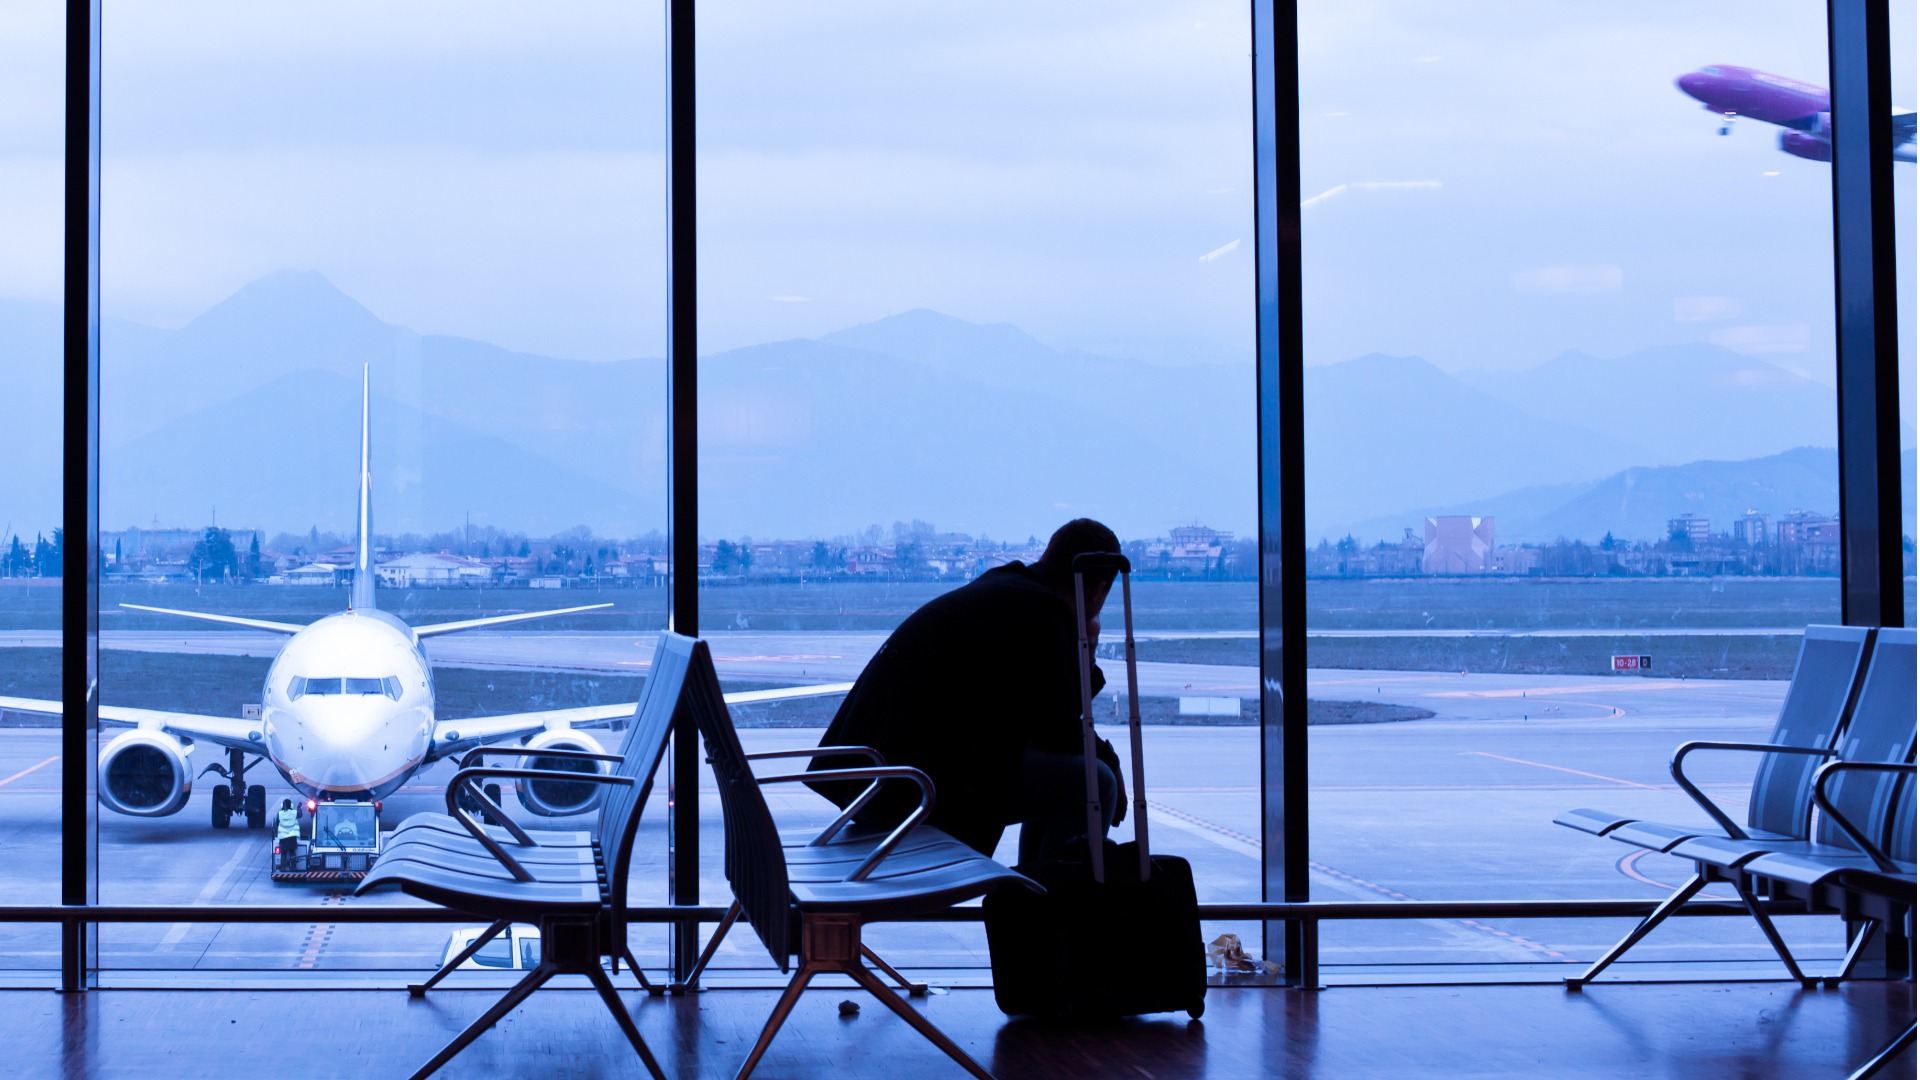 Three ways airlines might respond to the loss of business passengers